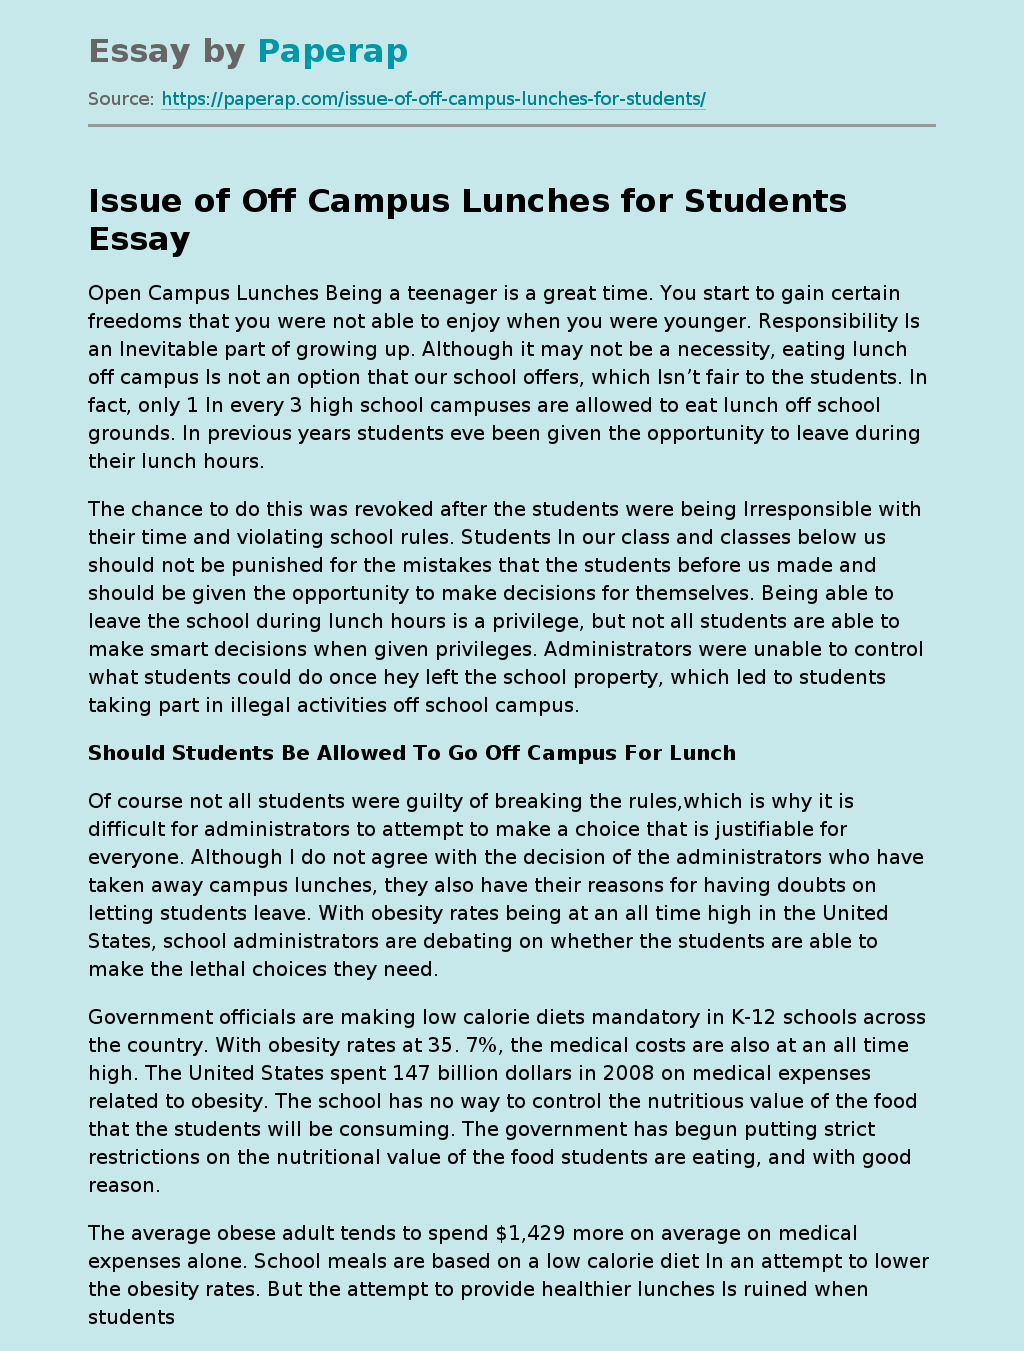 Issue of Off Campus Lunches for Students